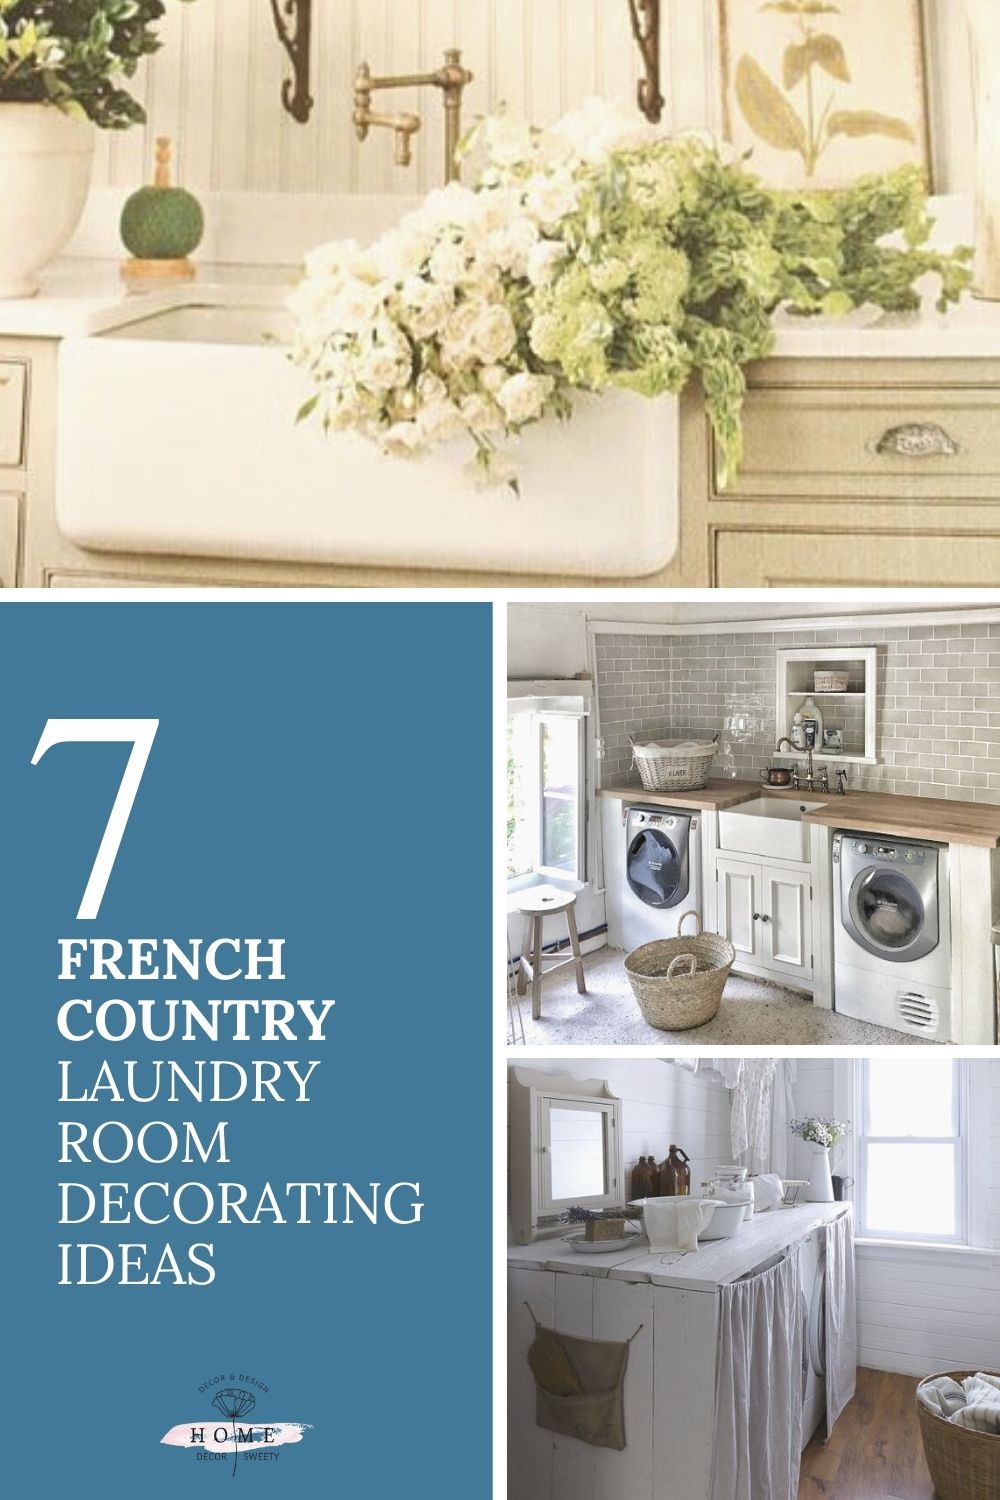 French Country laundry room decorating ideas